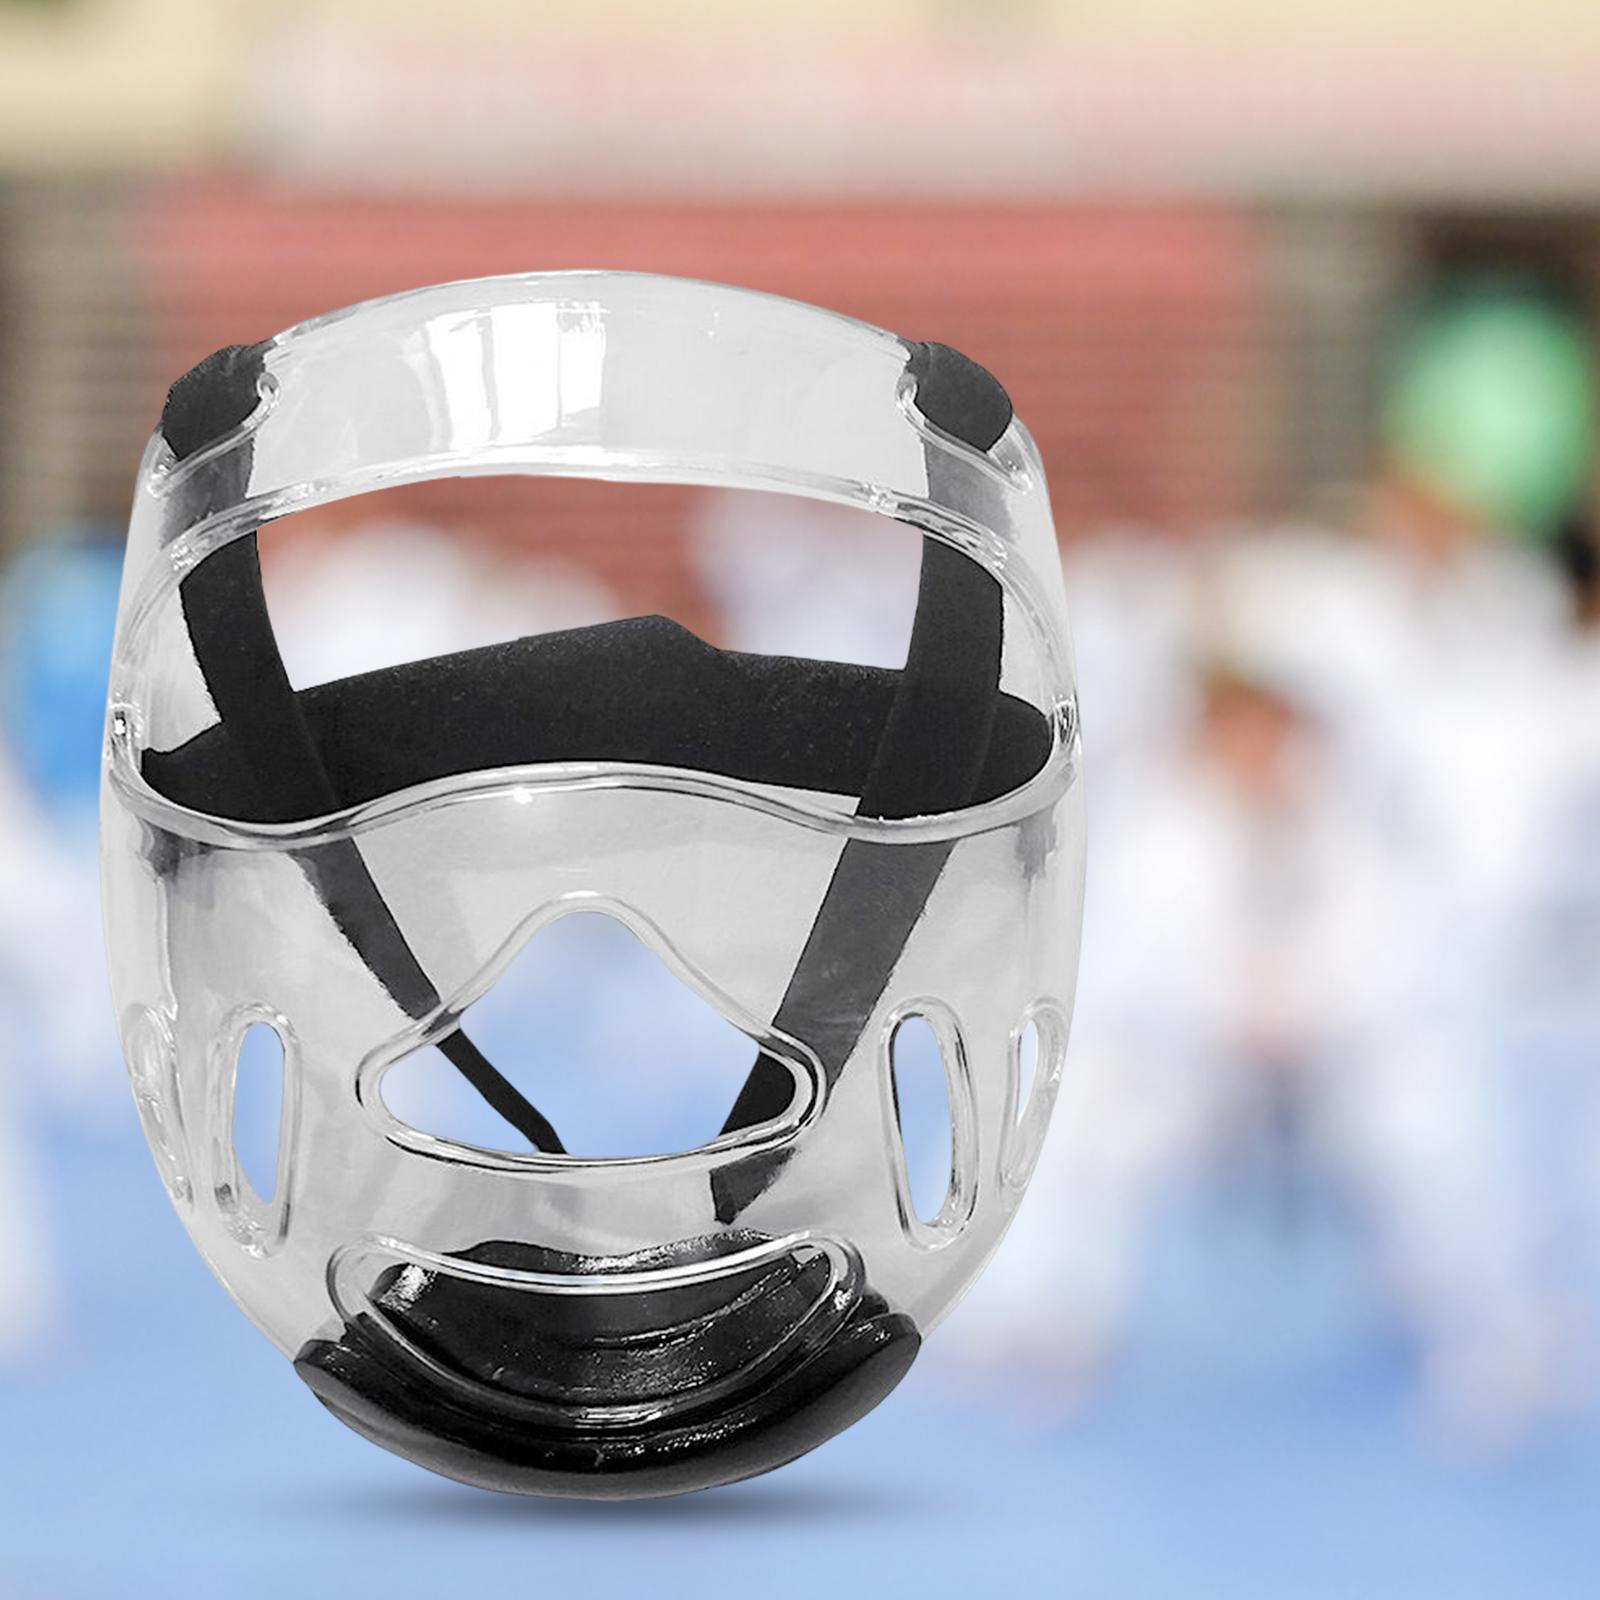 Clear Taekwondo Face Shield Protection Cover Helmet Cover Sports Gear Adults